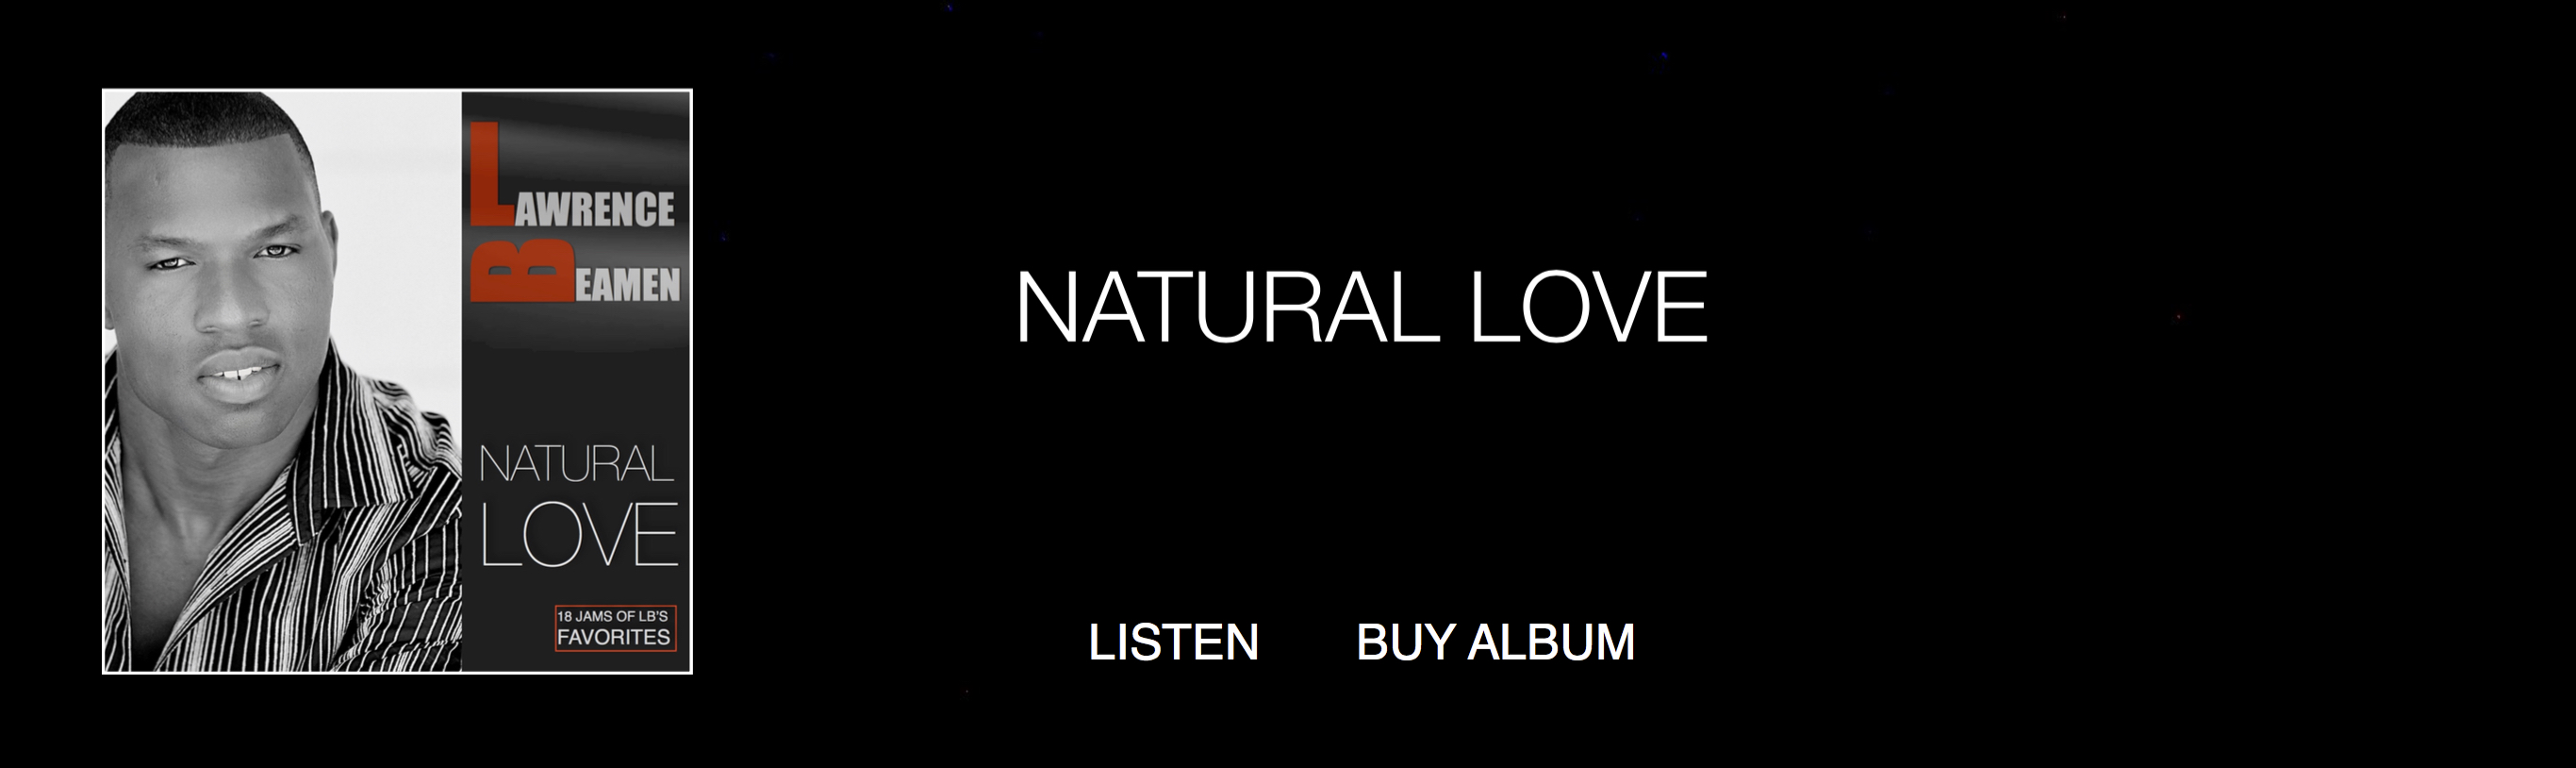 "Natural Love" 2013 - 14 R&B Soulful Songs and more.